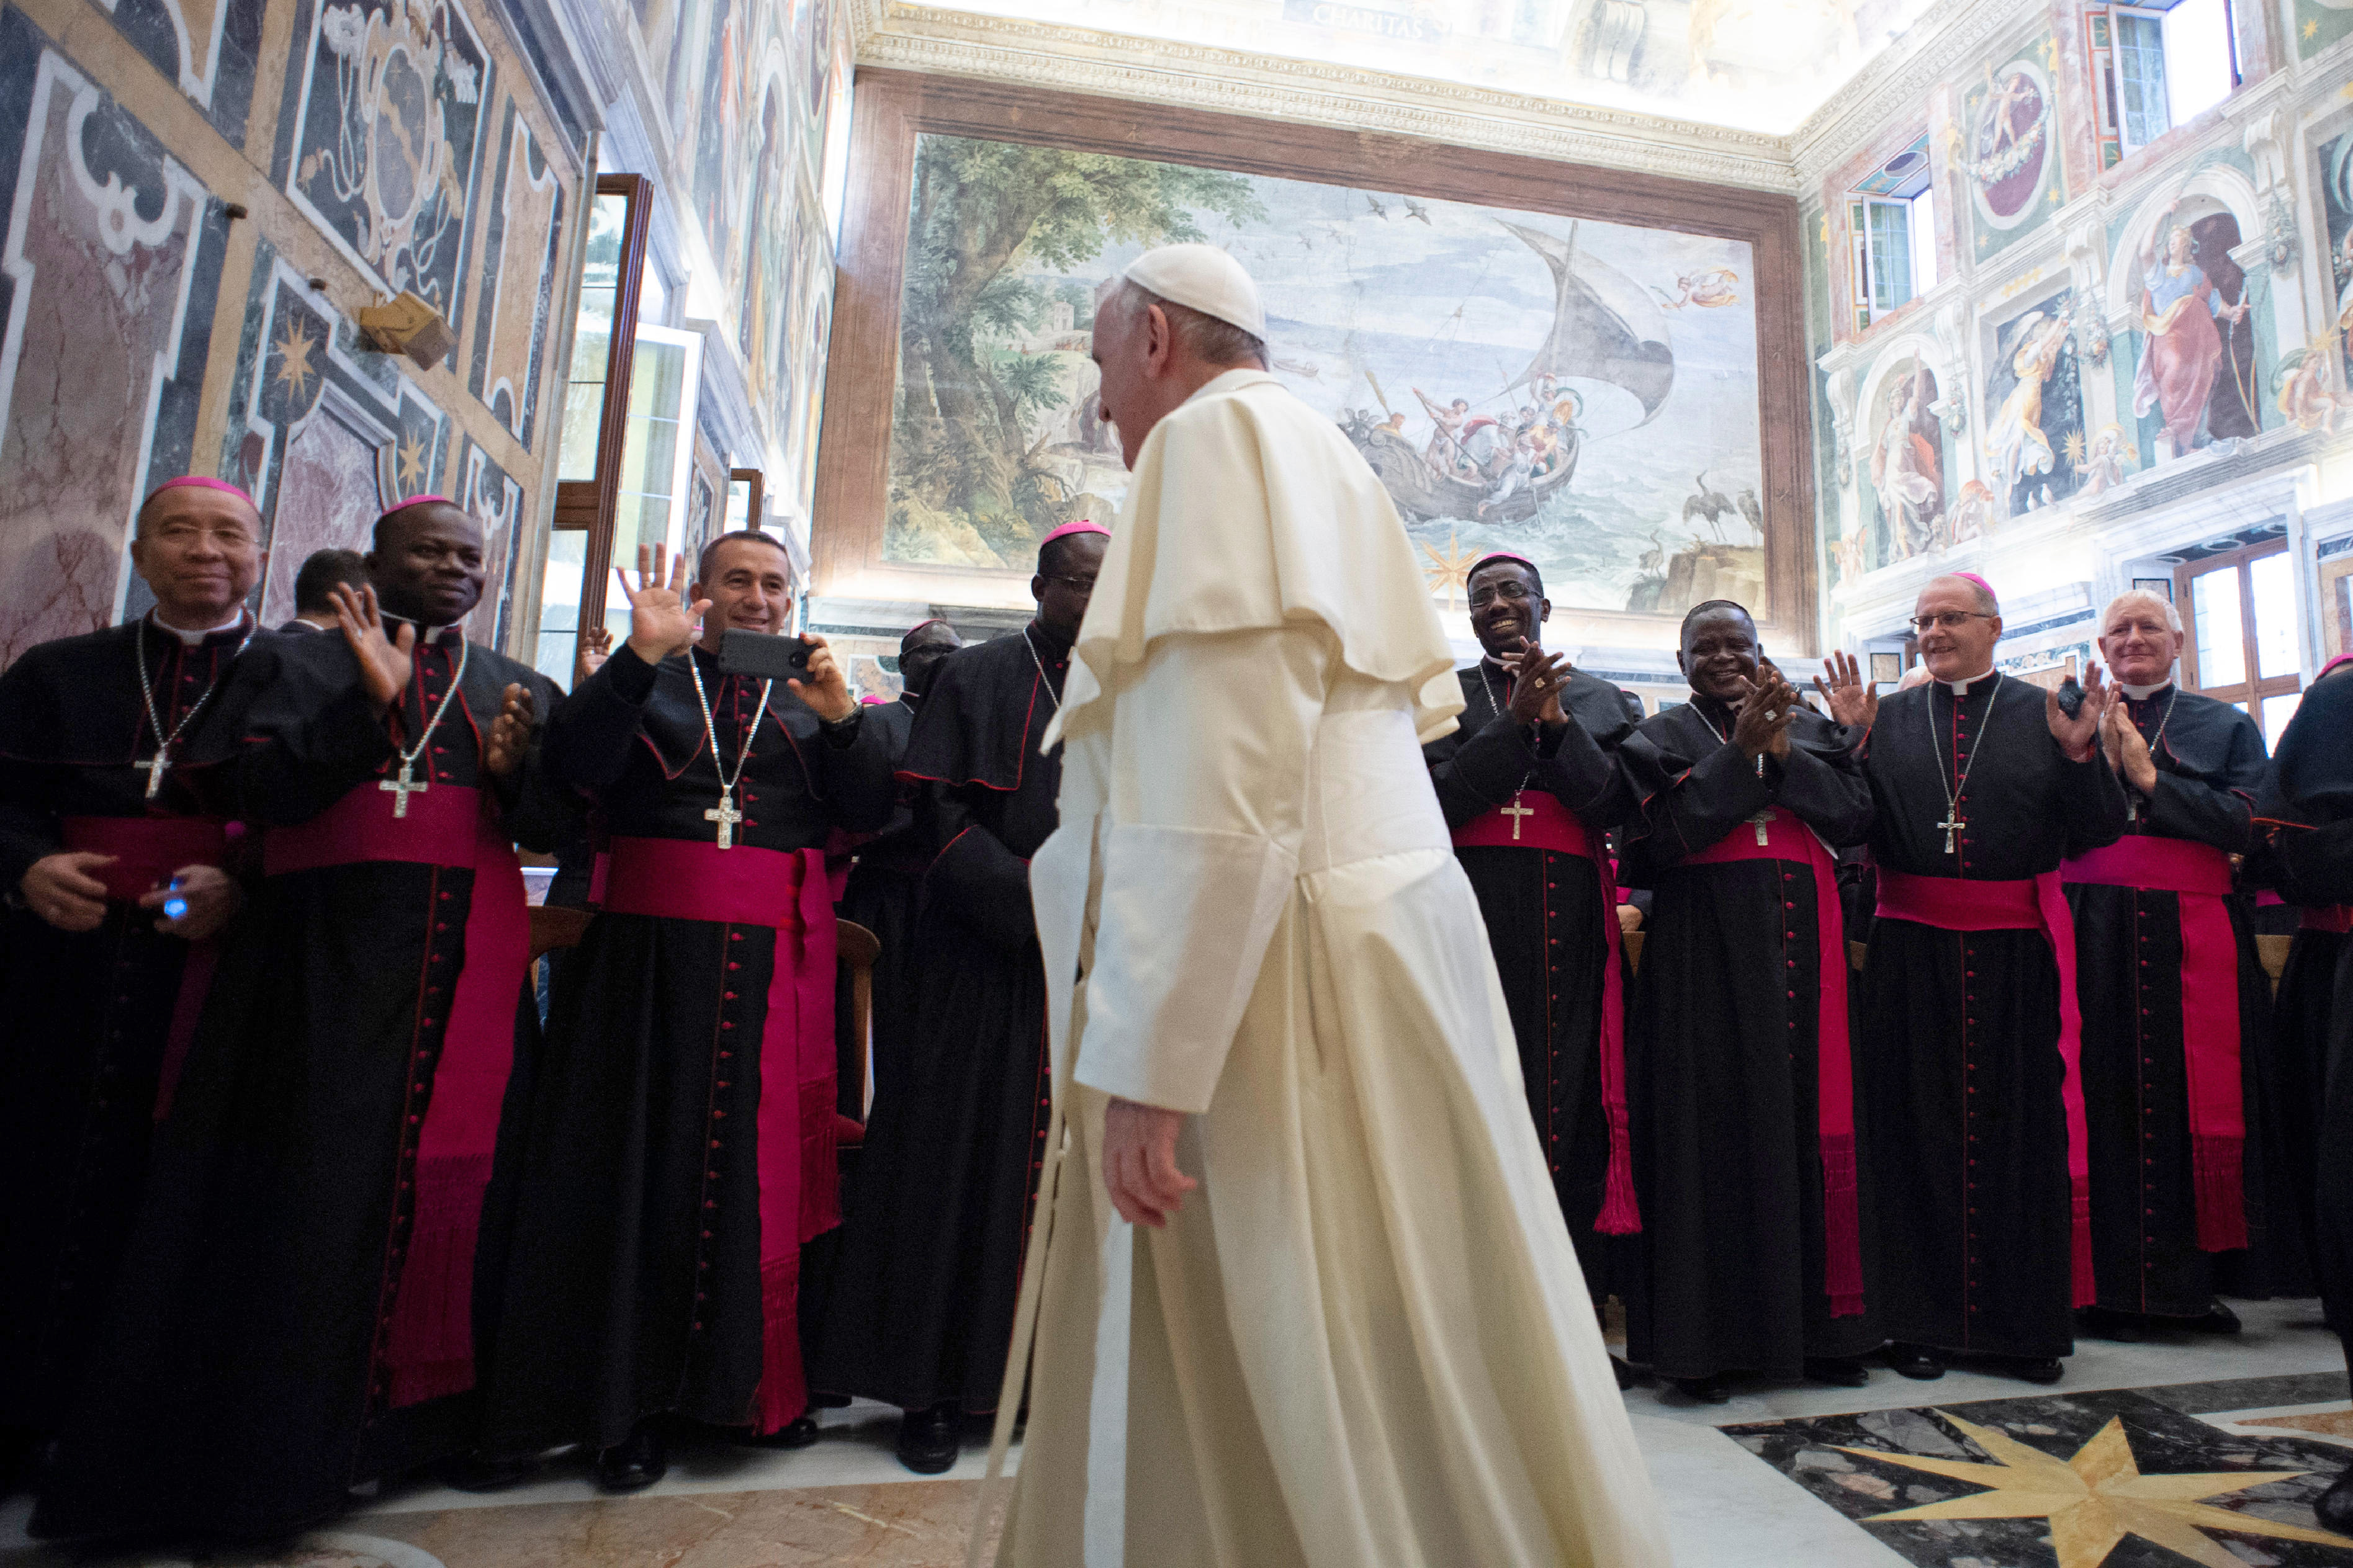 Build church unity and shun clericalism, pope tells new bishops